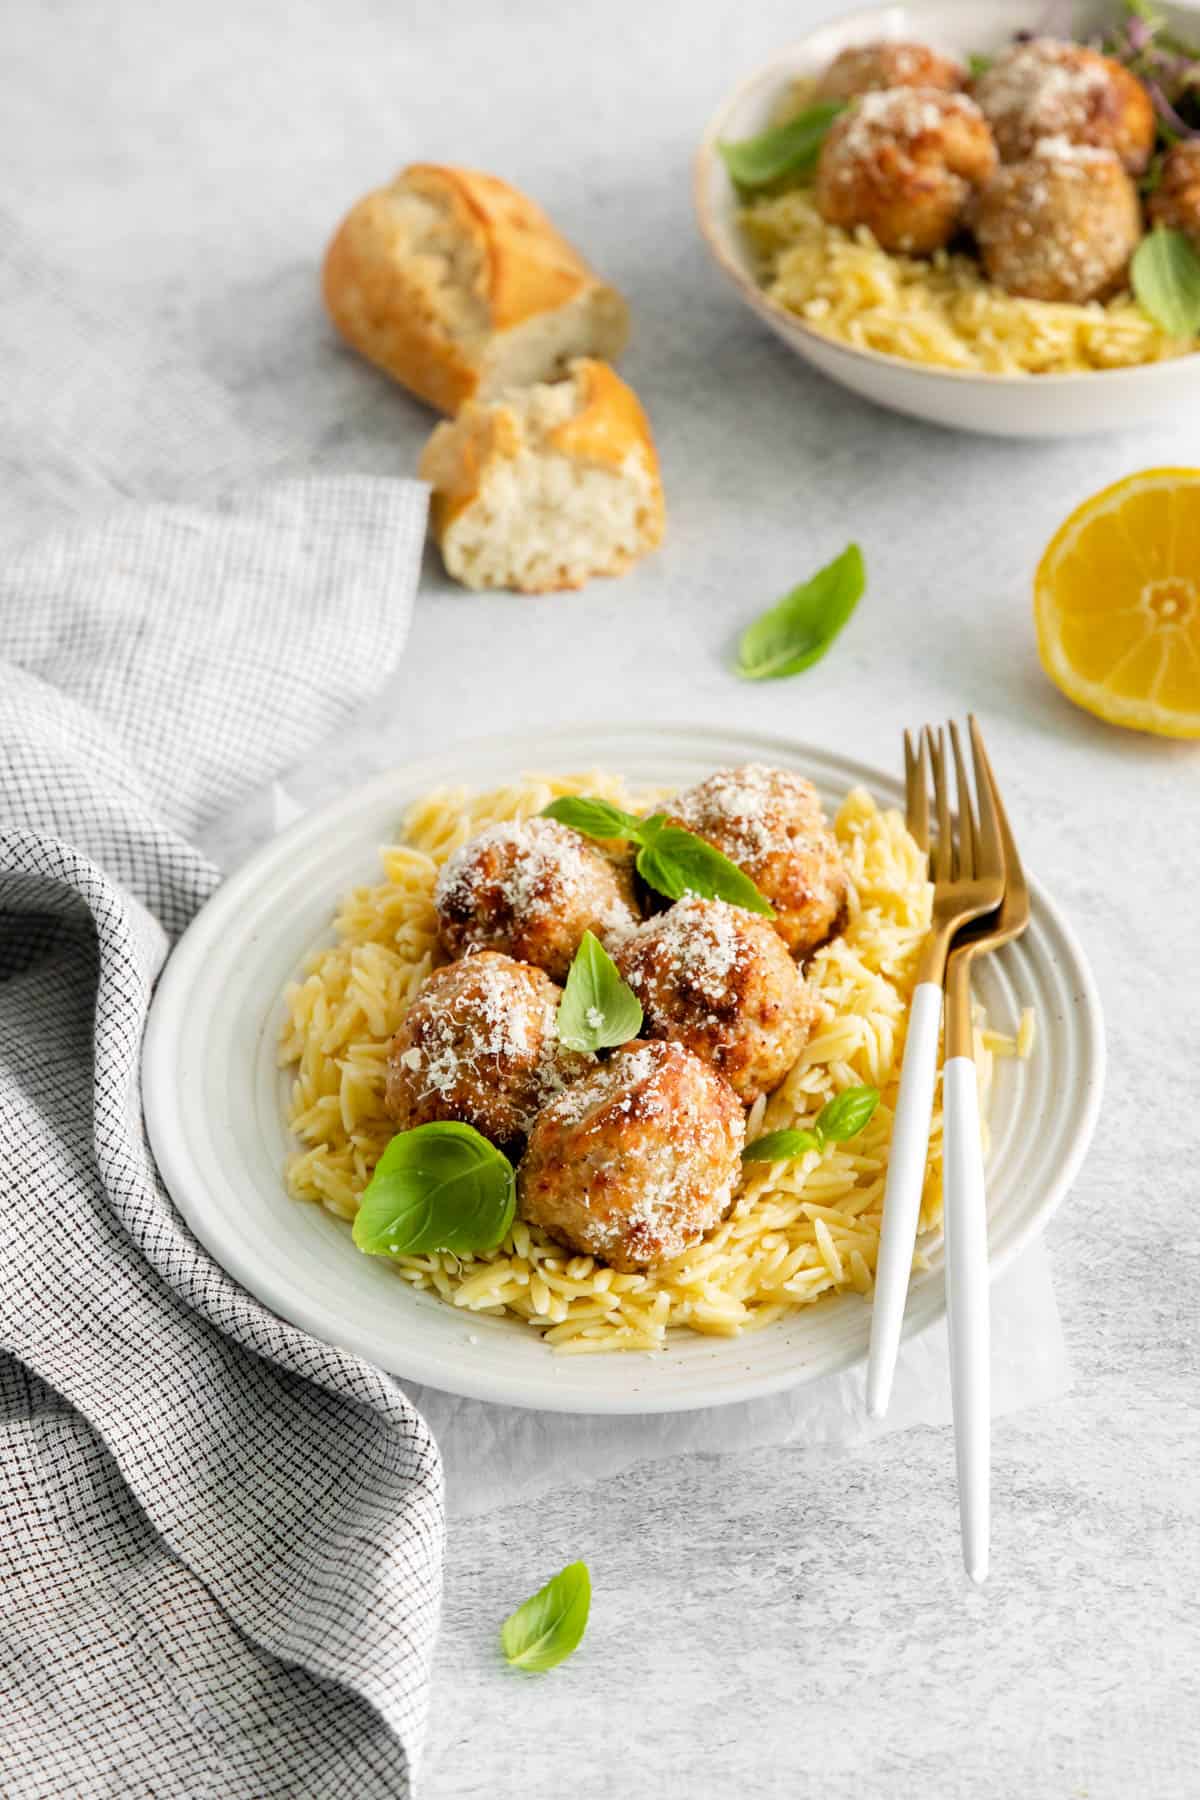 Air fryer lemon chicken meatballs on a bed of orzo pasta.